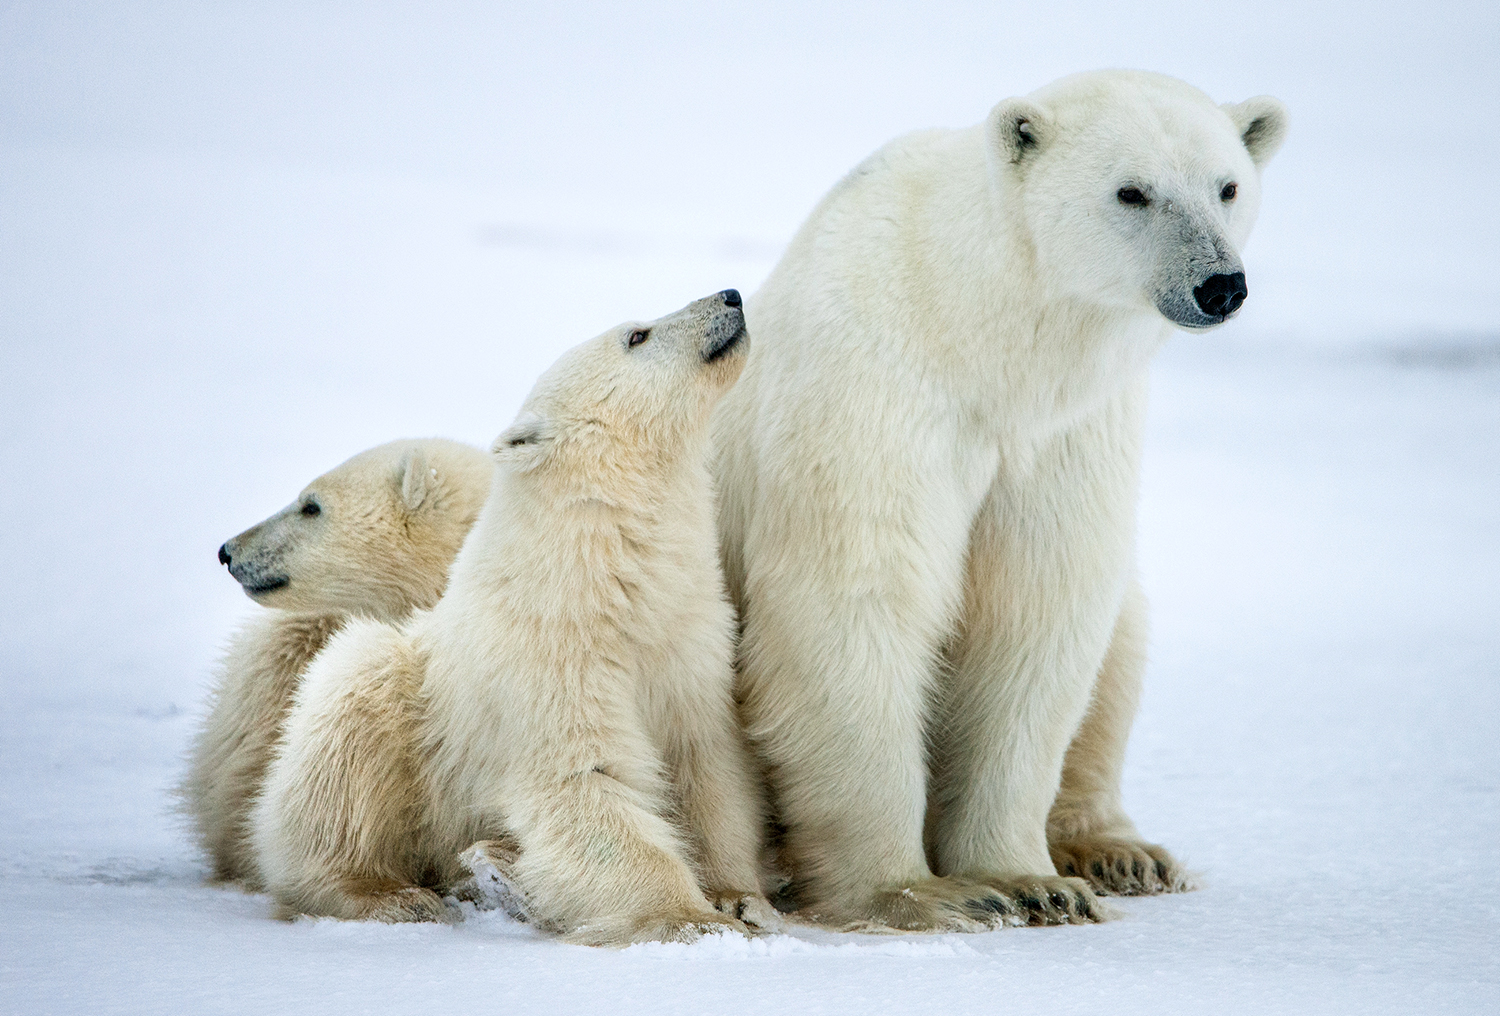 A polar bear and two cubs sit on ice.